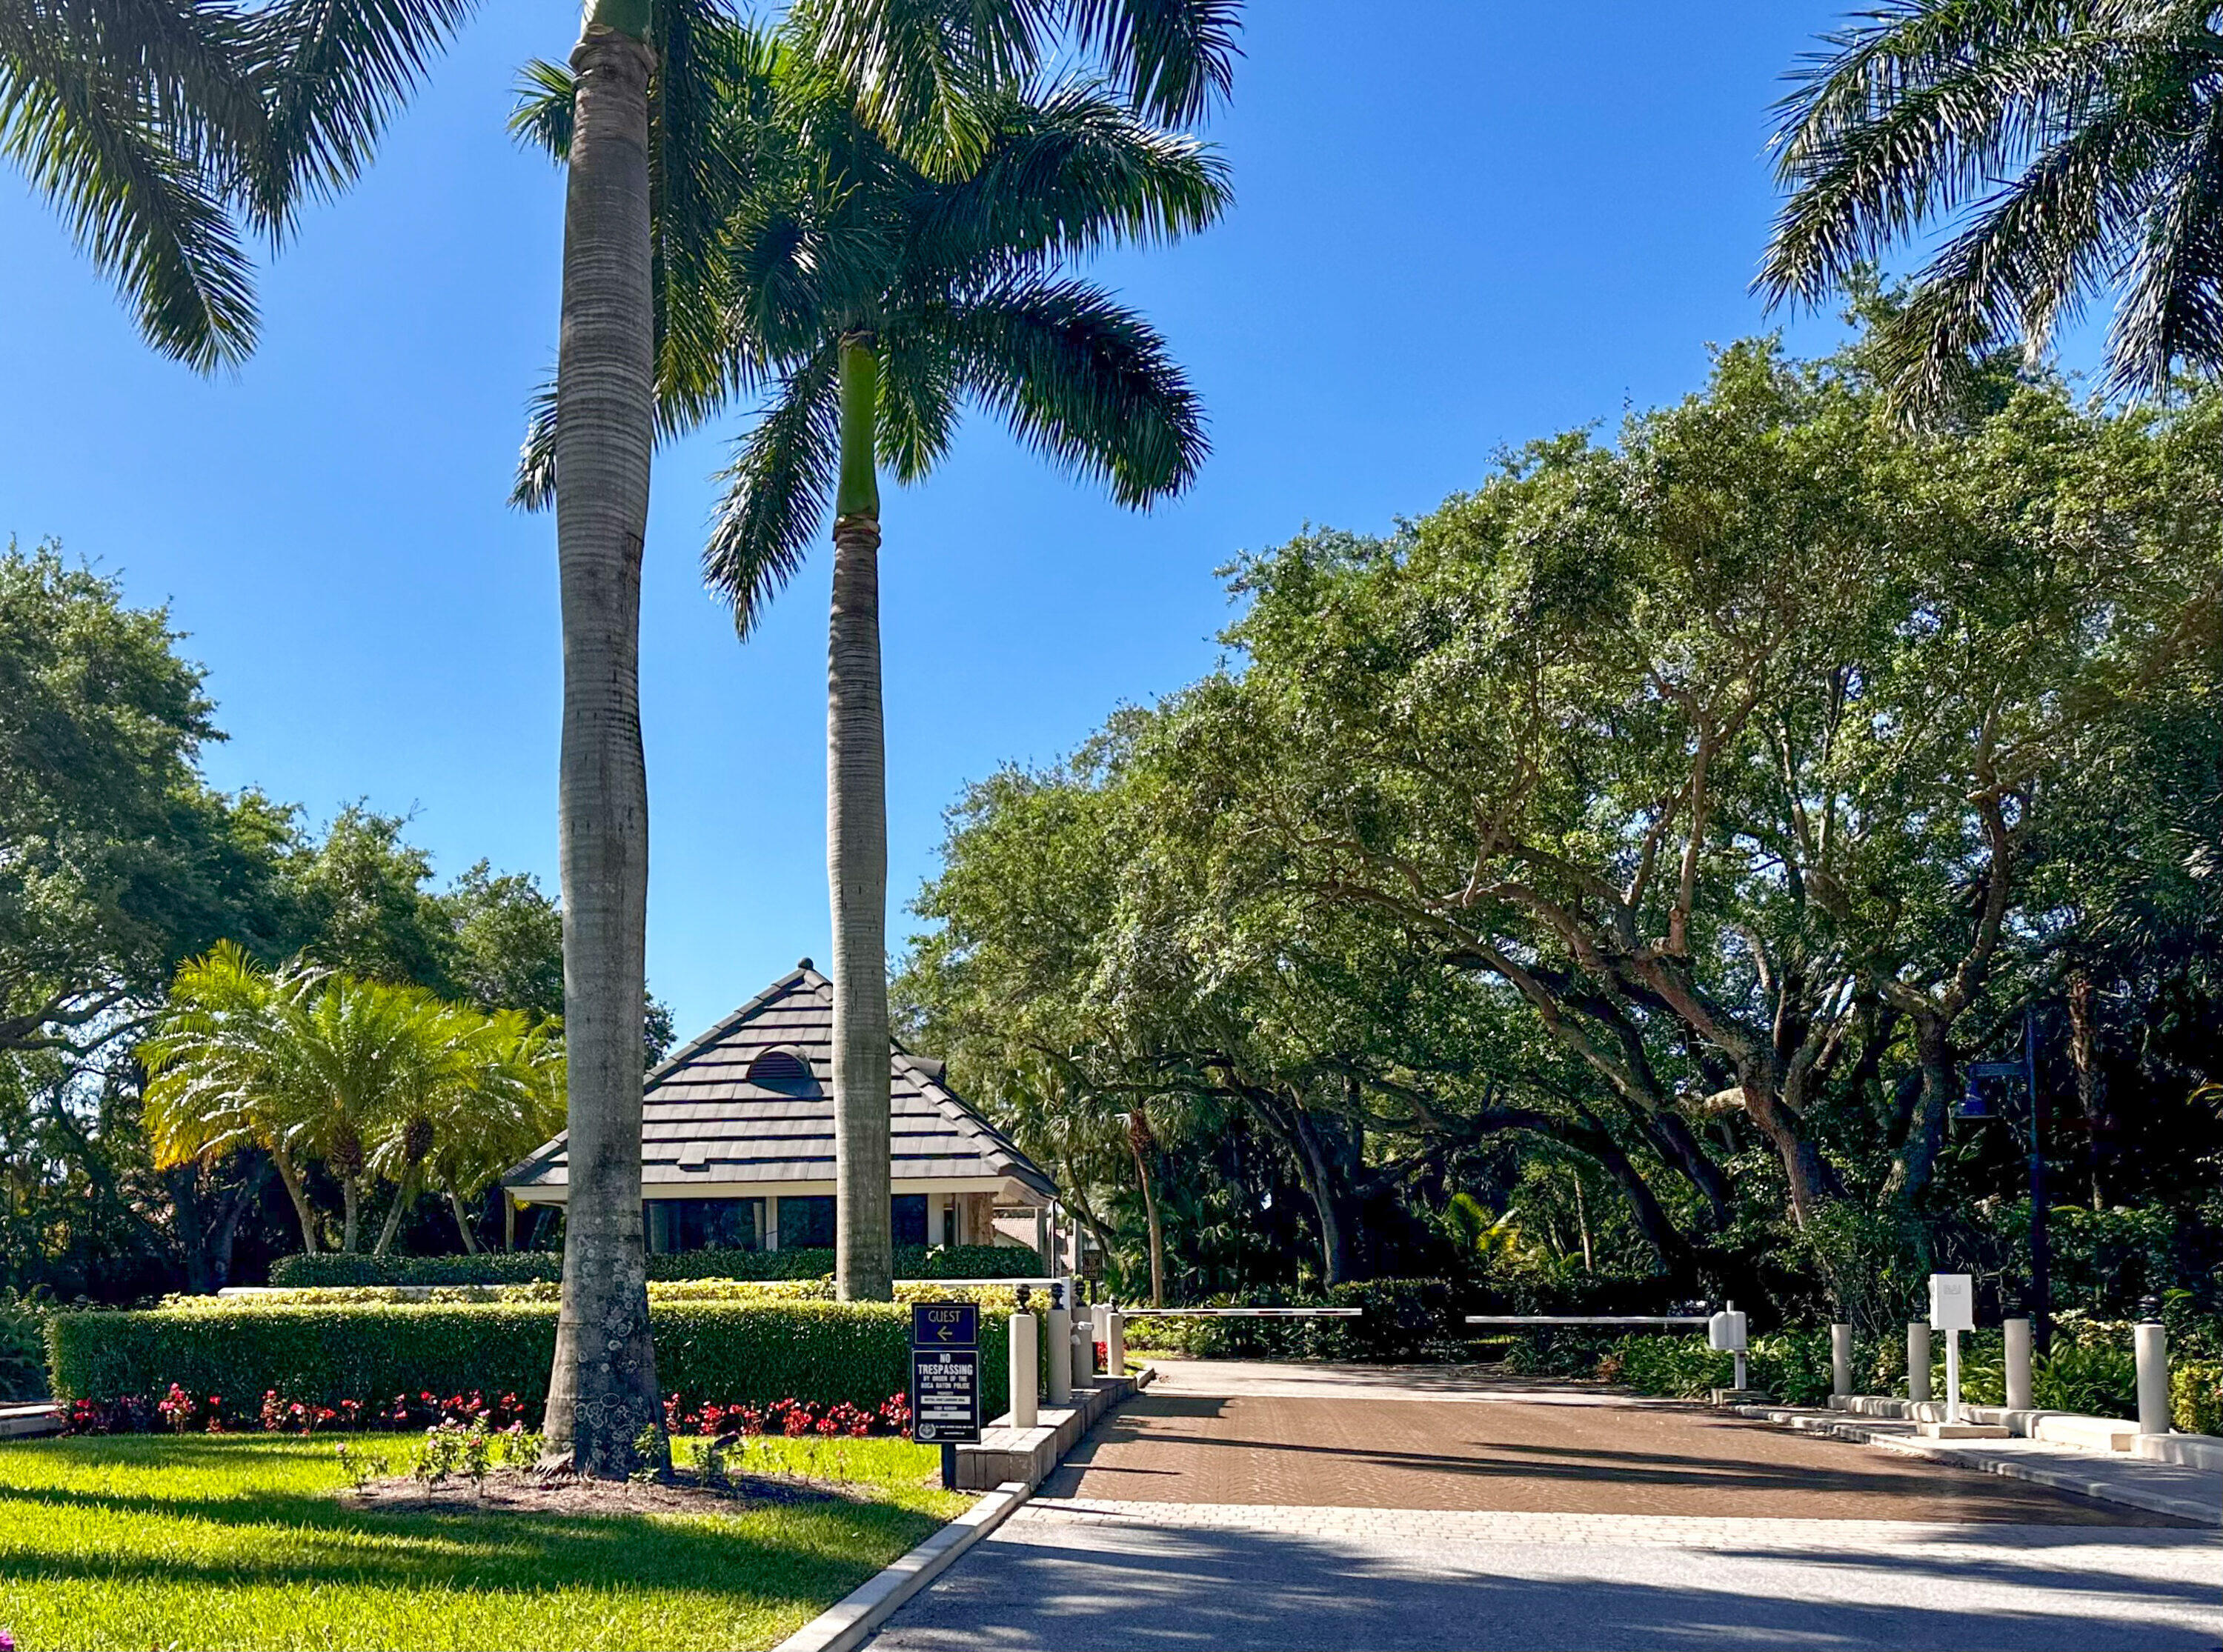 1900 SW 6th Place, Boca Raton, Florida, 33486, United States, 4 Bedrooms Bedrooms, ,4 BathroomsBathrooms,Residential,For Sale,1900 SW 6th Place,1504463